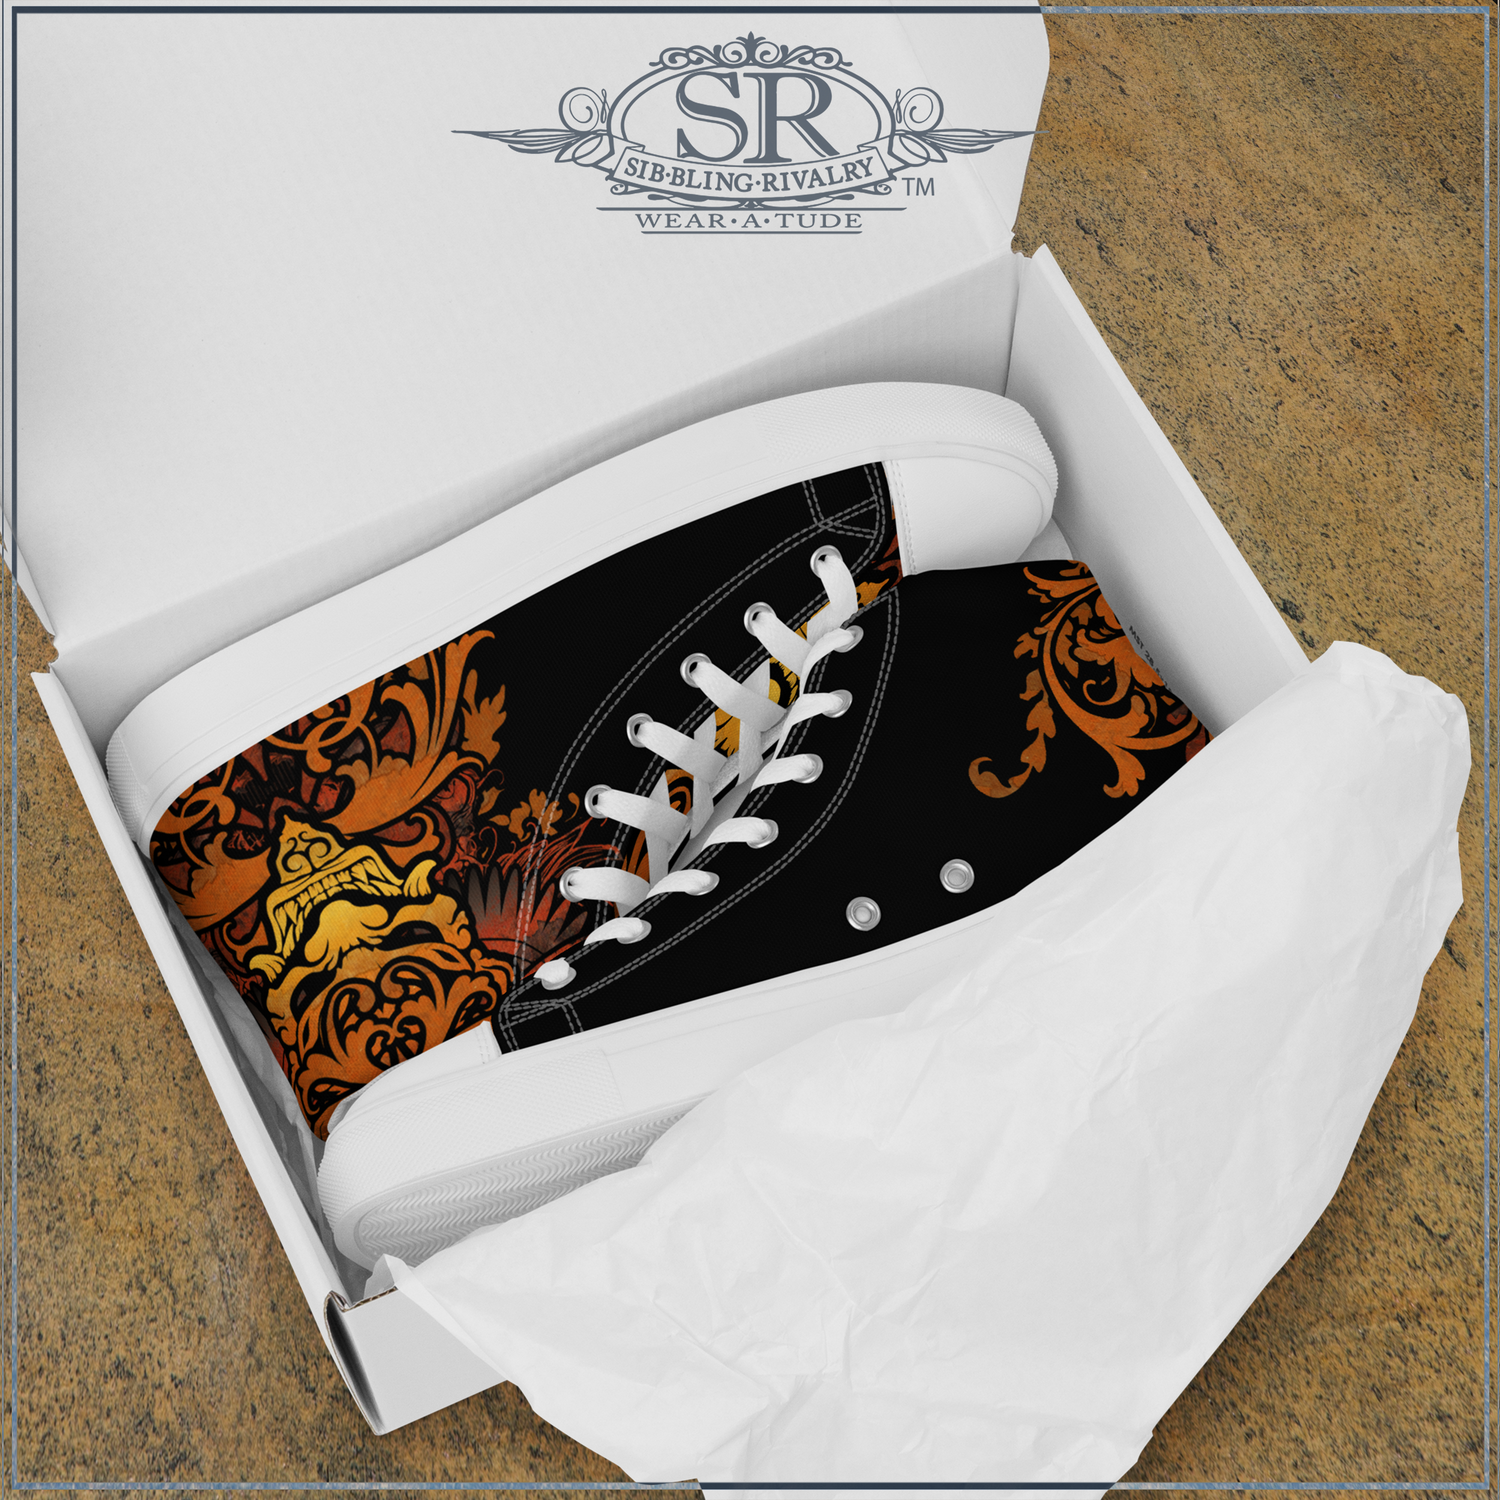 Rusted Reaper Mens hightop sneakers. Gold, orange and yellow demon on a black background makes these rocker/skater hightop shoes for men absolutely epic.Design by The Joubert Sisters of SibBling Rivalry Design, Rocker clothing with Wear Atude.